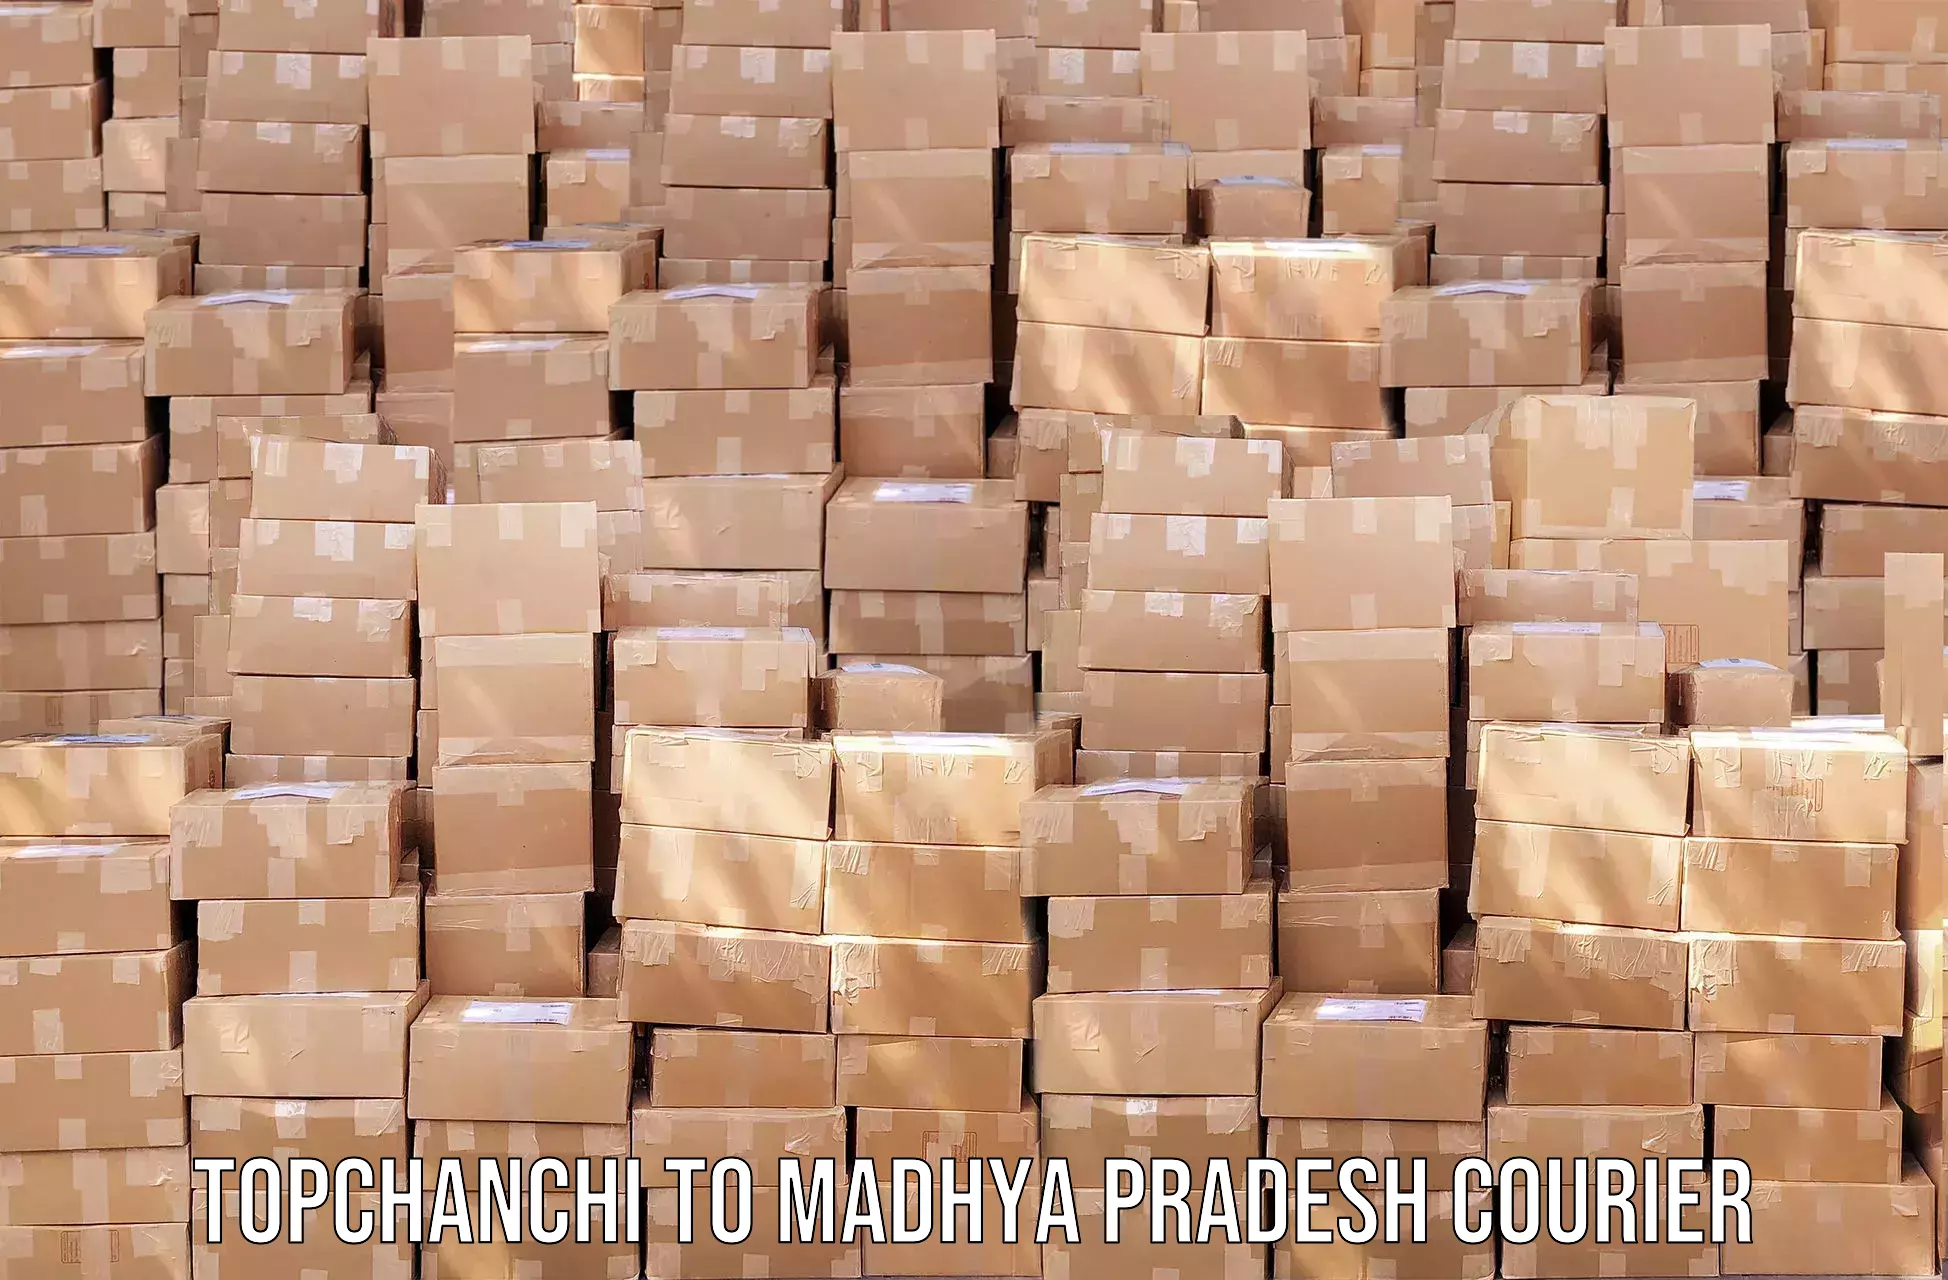 Reliable delivery network Topchanchi to Madhya Pradesh